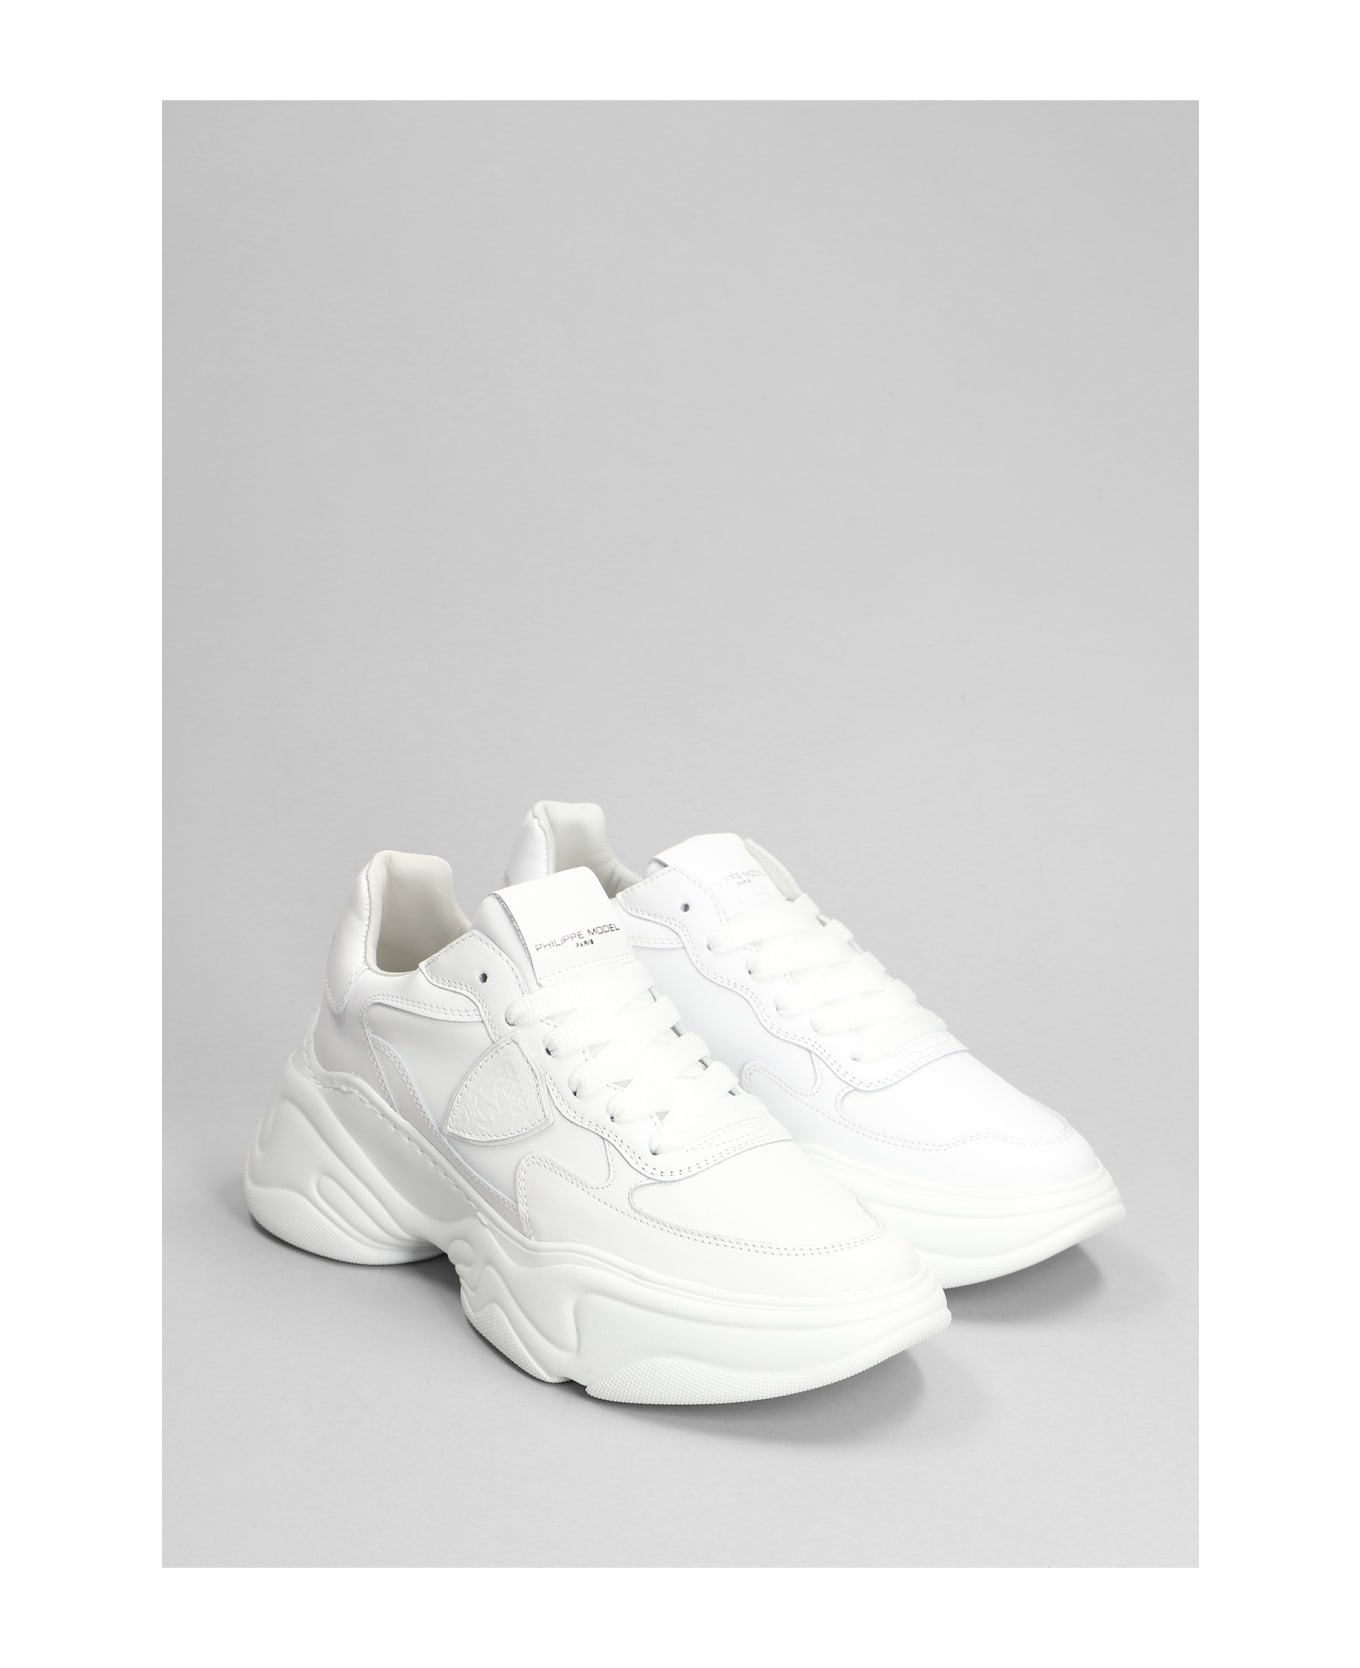 Philippe Model Rivoli Low Sneakers In White Leather - white スニーカー